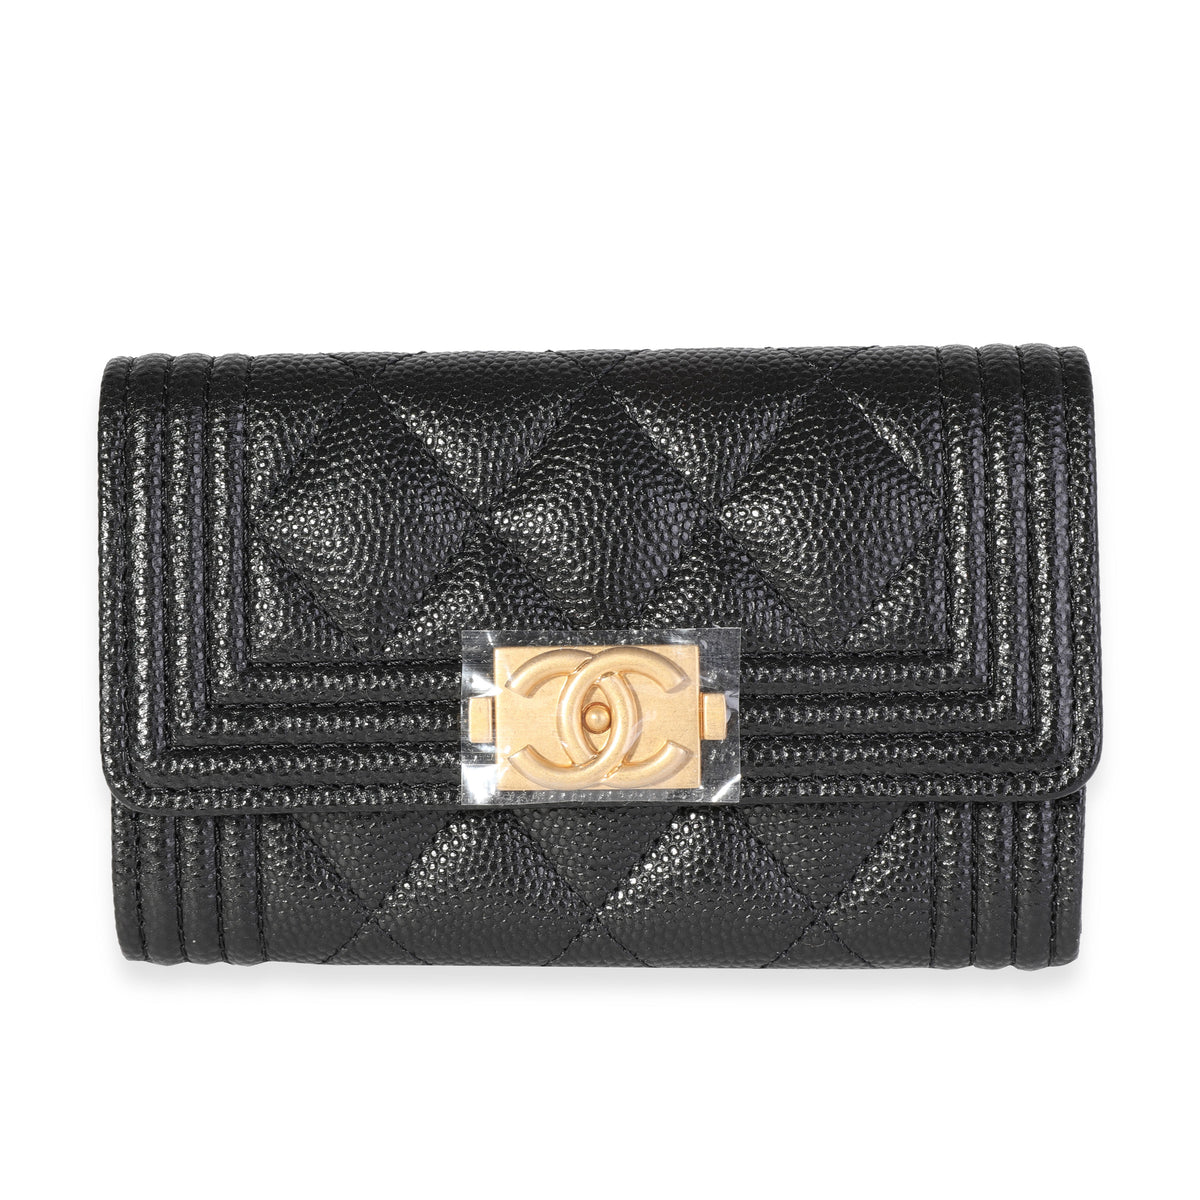 Compare prices for Grained Calfskin  GoldTone Metal Blue BOY CHANEL Flap  Coin Purse A84311B01694N5330 in official stores